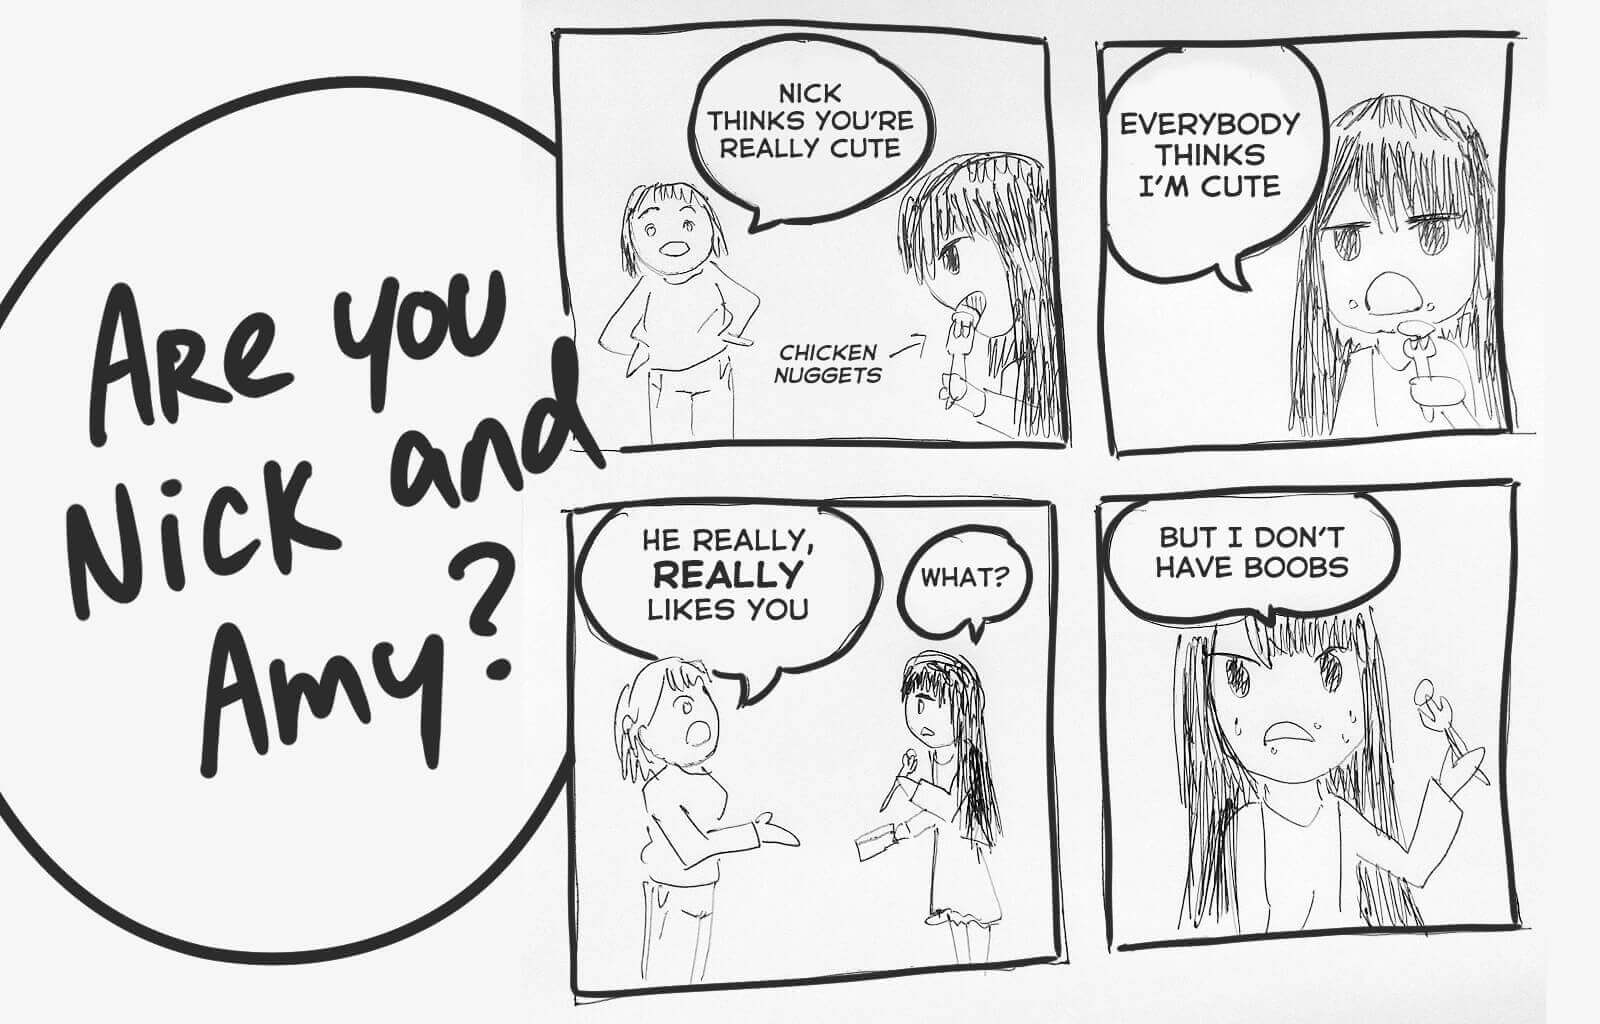 Are You Nick and Amy? comic